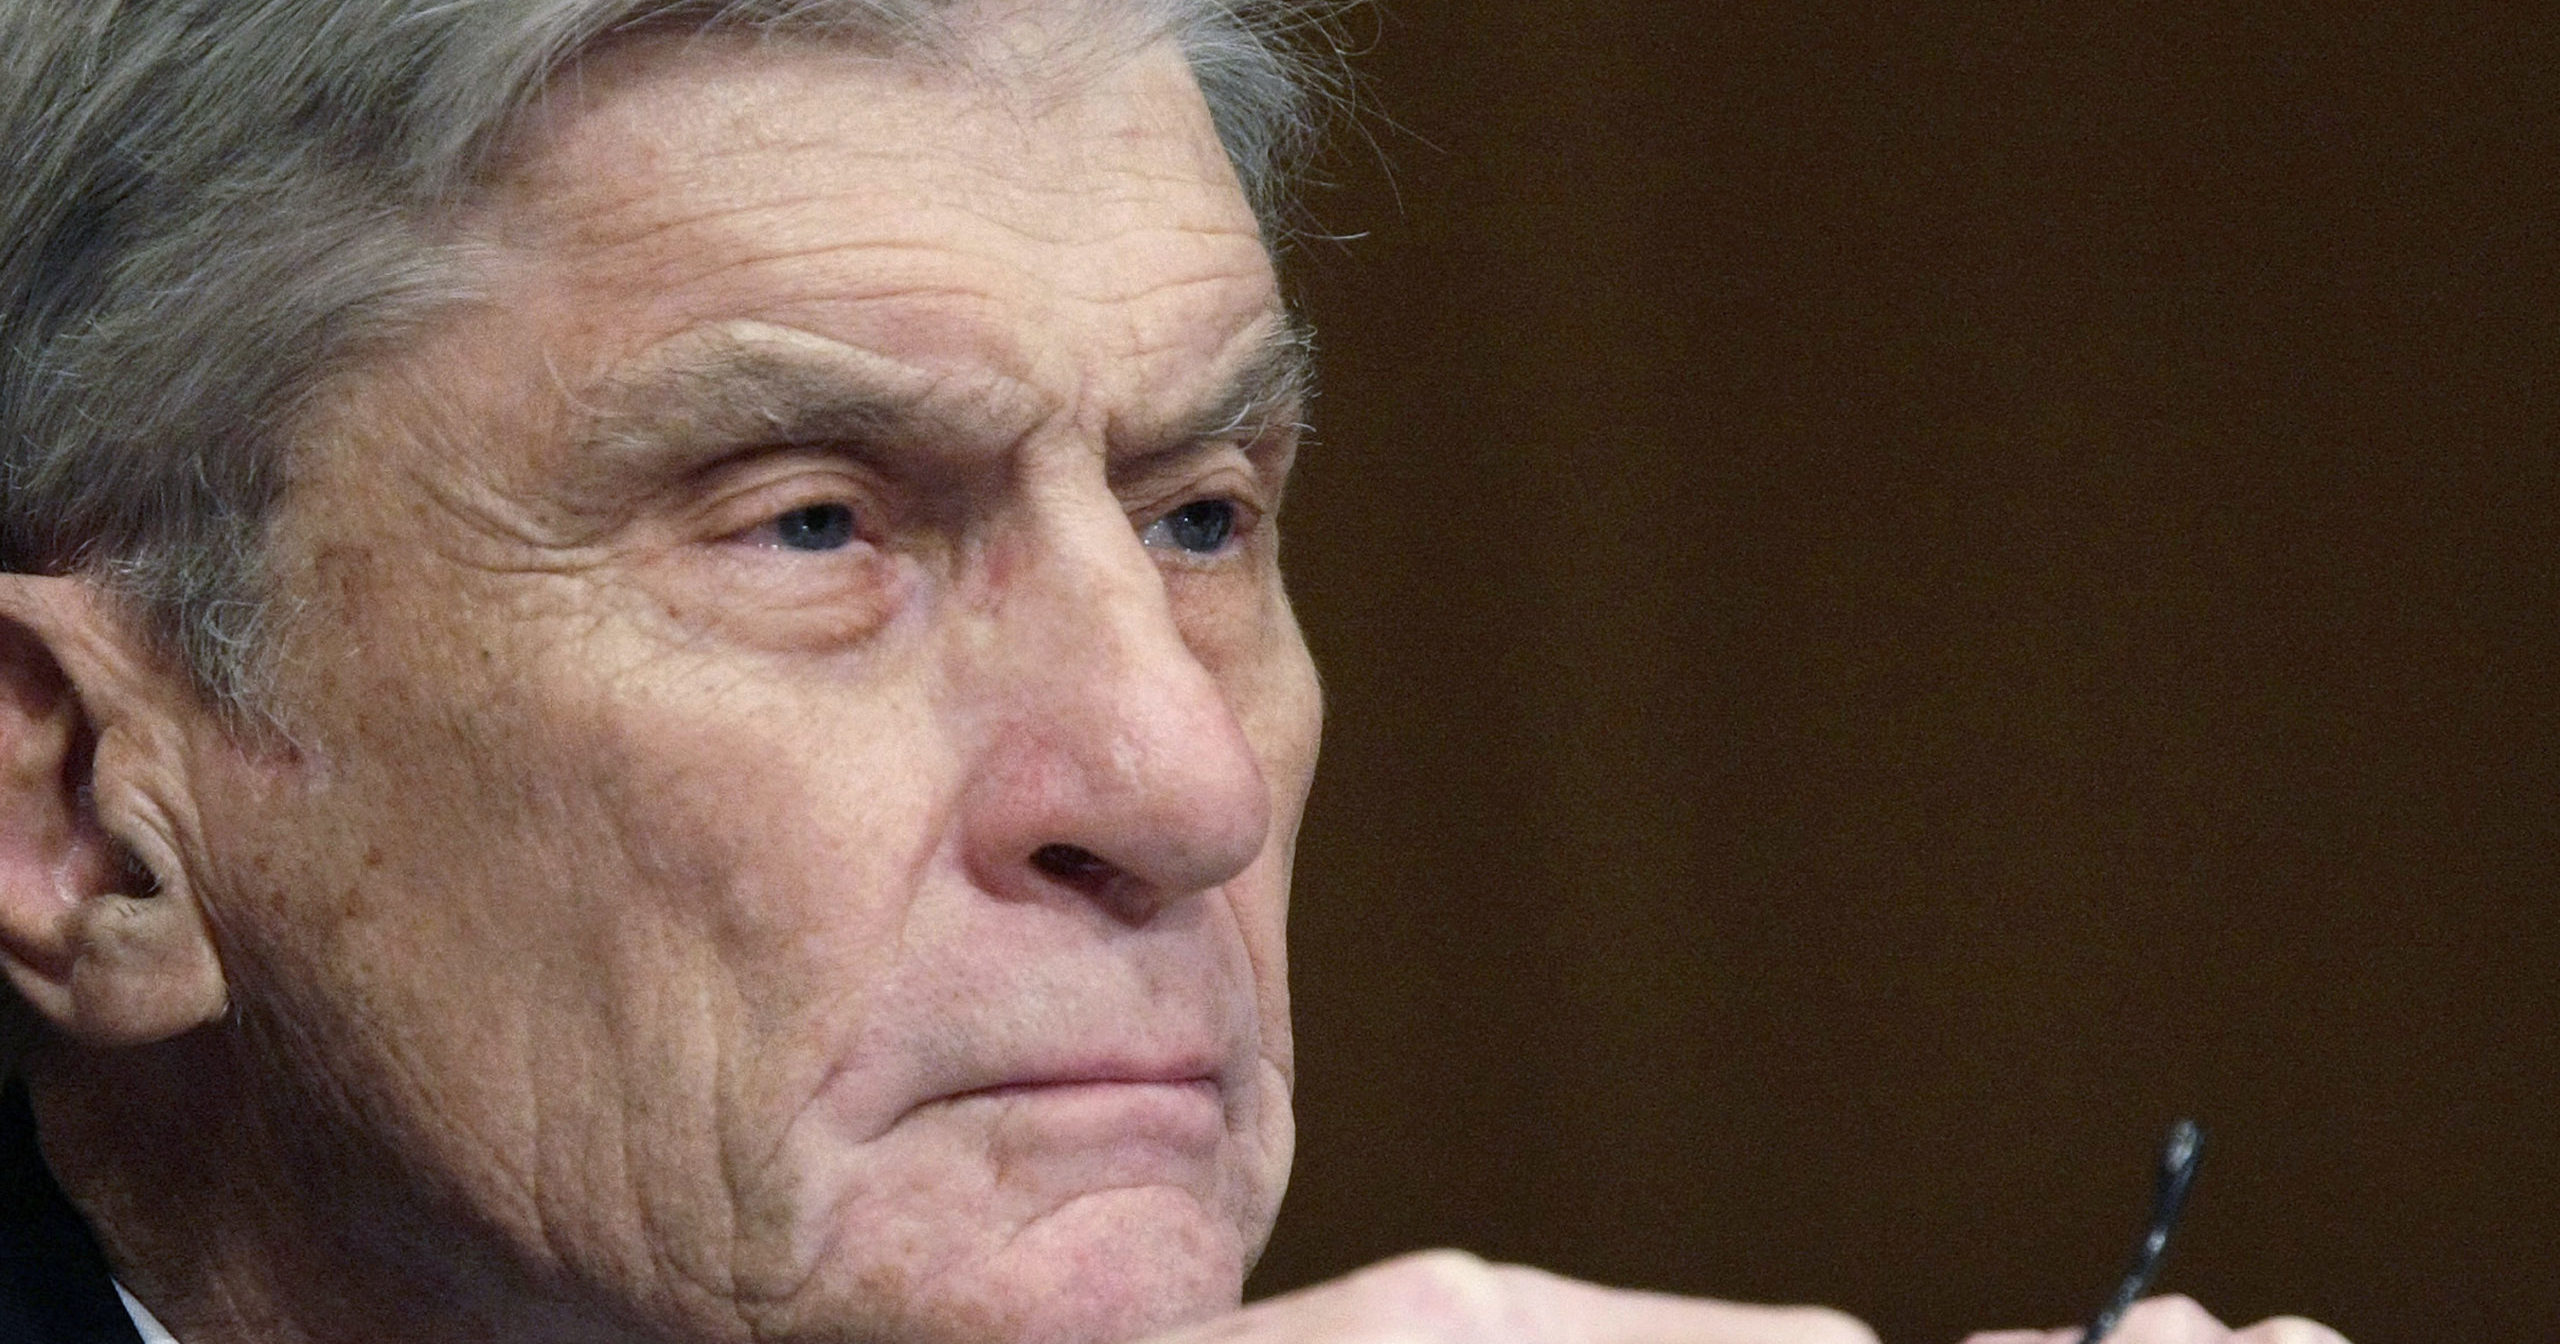 In this April 8, 2008, file photo, then Senate Armed Services Committee member Sen. John Warner, a Virginia Republican, listens to testimony on Capitol Hill in Washington.